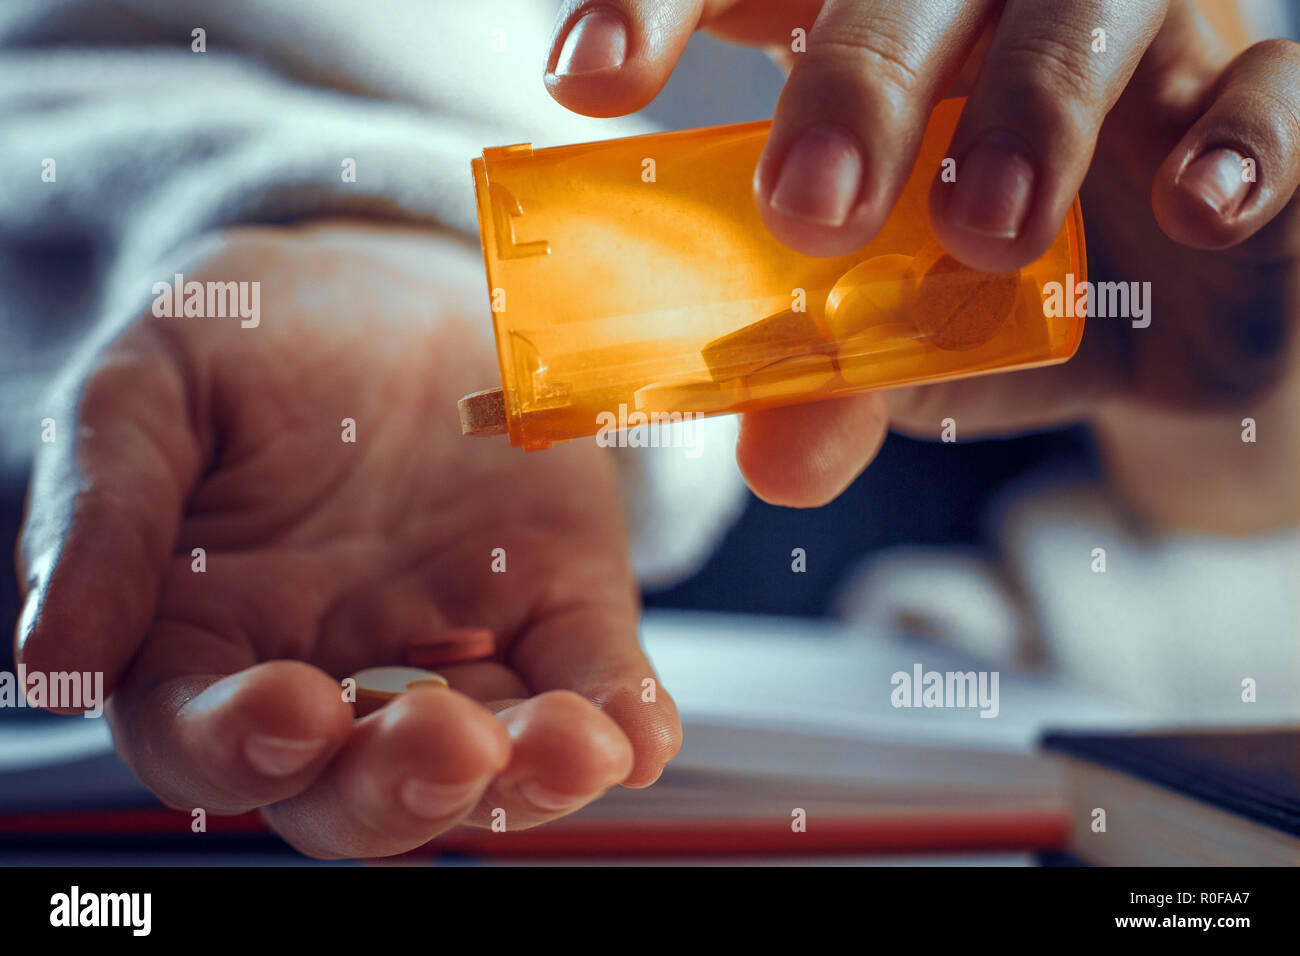 Close up look of hands while pouring the pills out of the bottle. Stock Photo